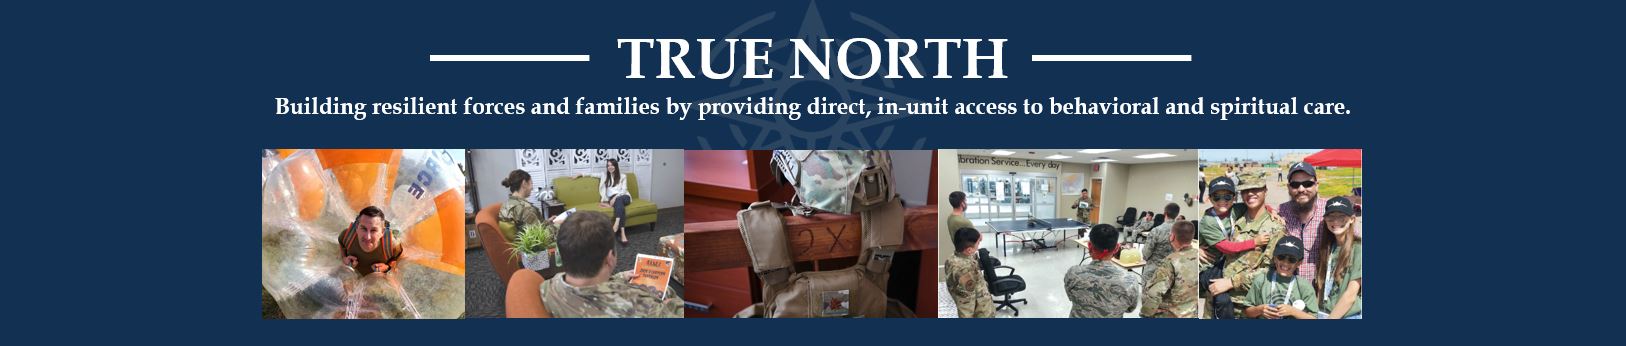 True North web page header graphic. Building resilient forces and families by providing direct, in unit access to behavioral and spiritual care. 